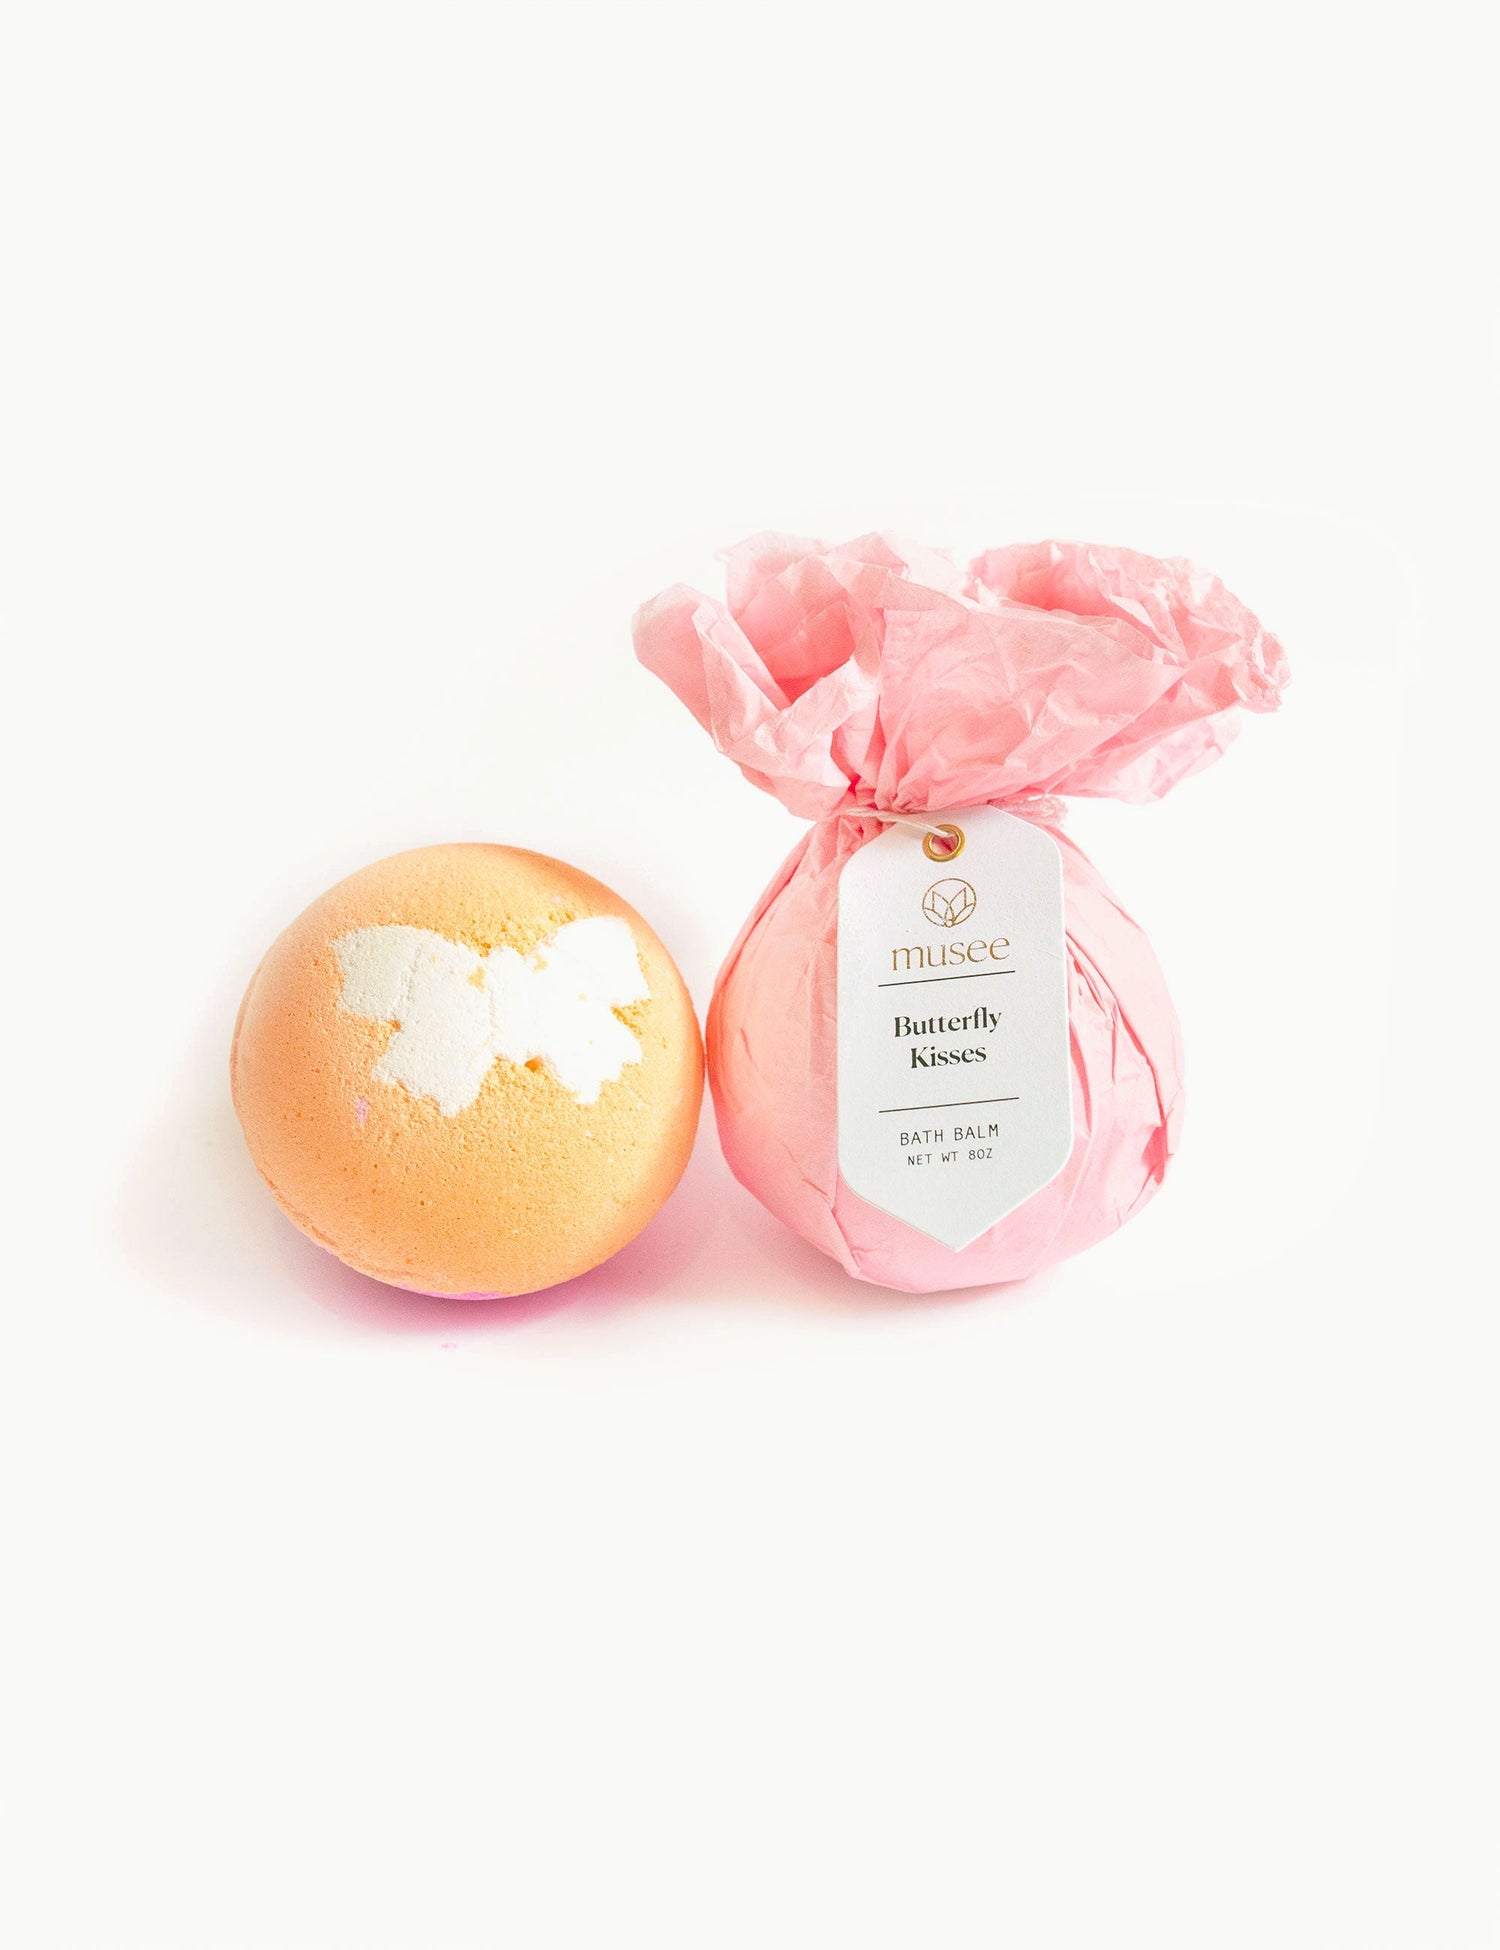 Musee Bath Bomb Bath & Body in Butterfly Kisses at Wrapsody